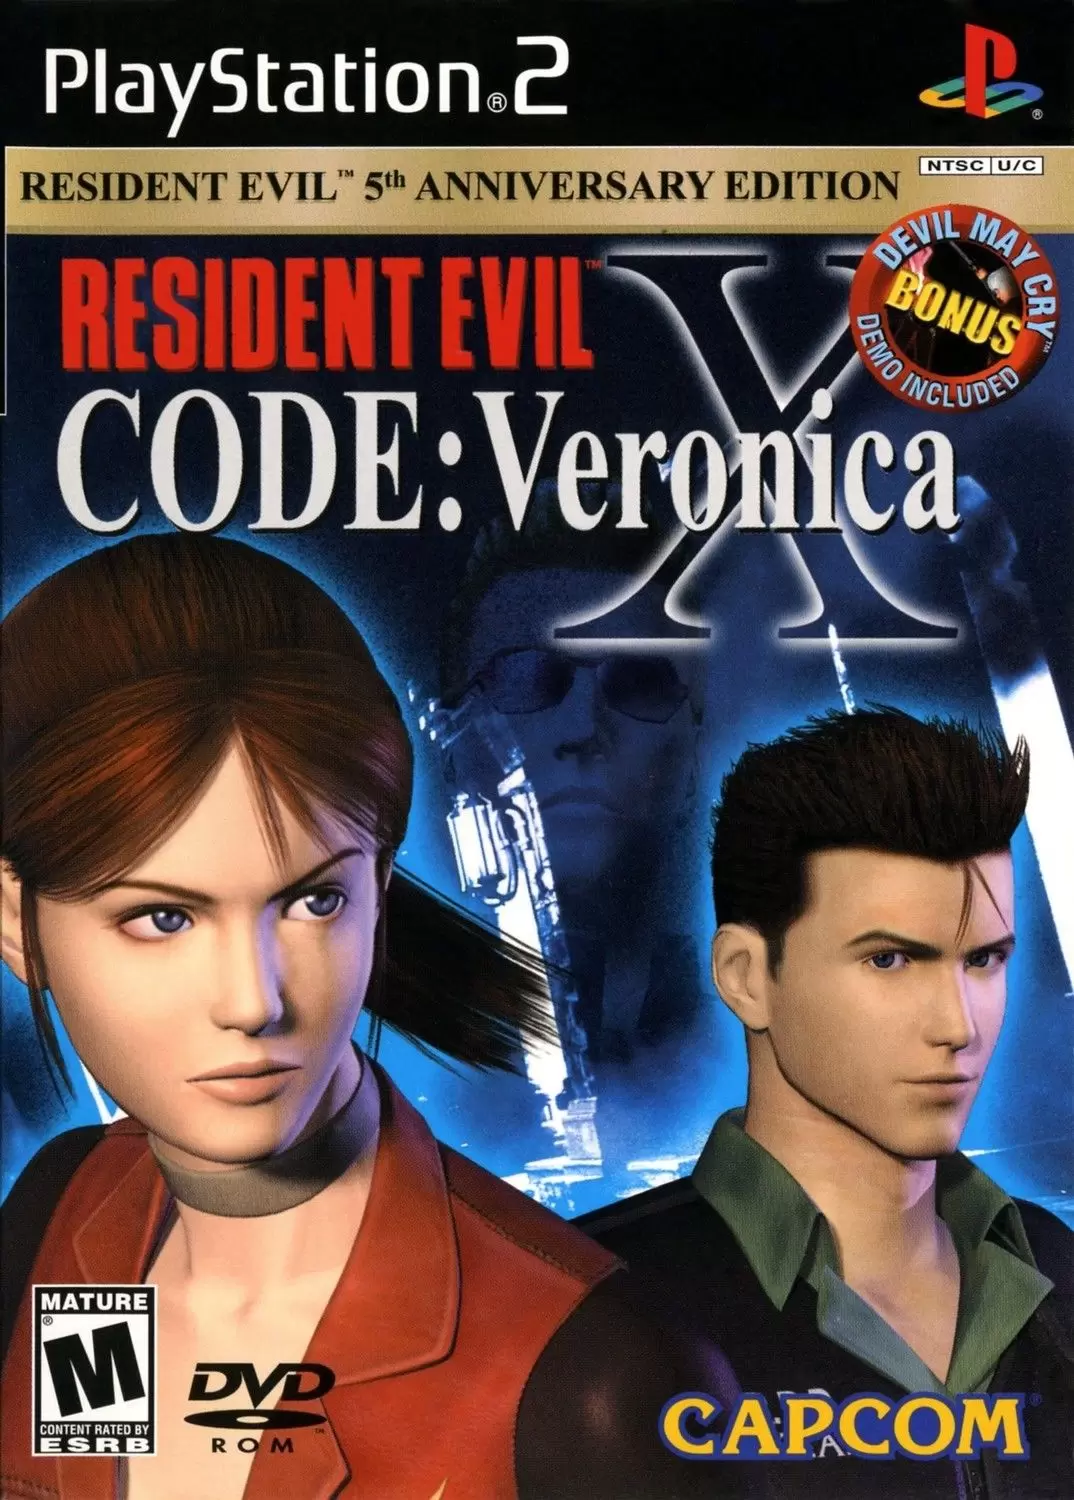 PS2 Games - Resident Evil Code: Veronica X